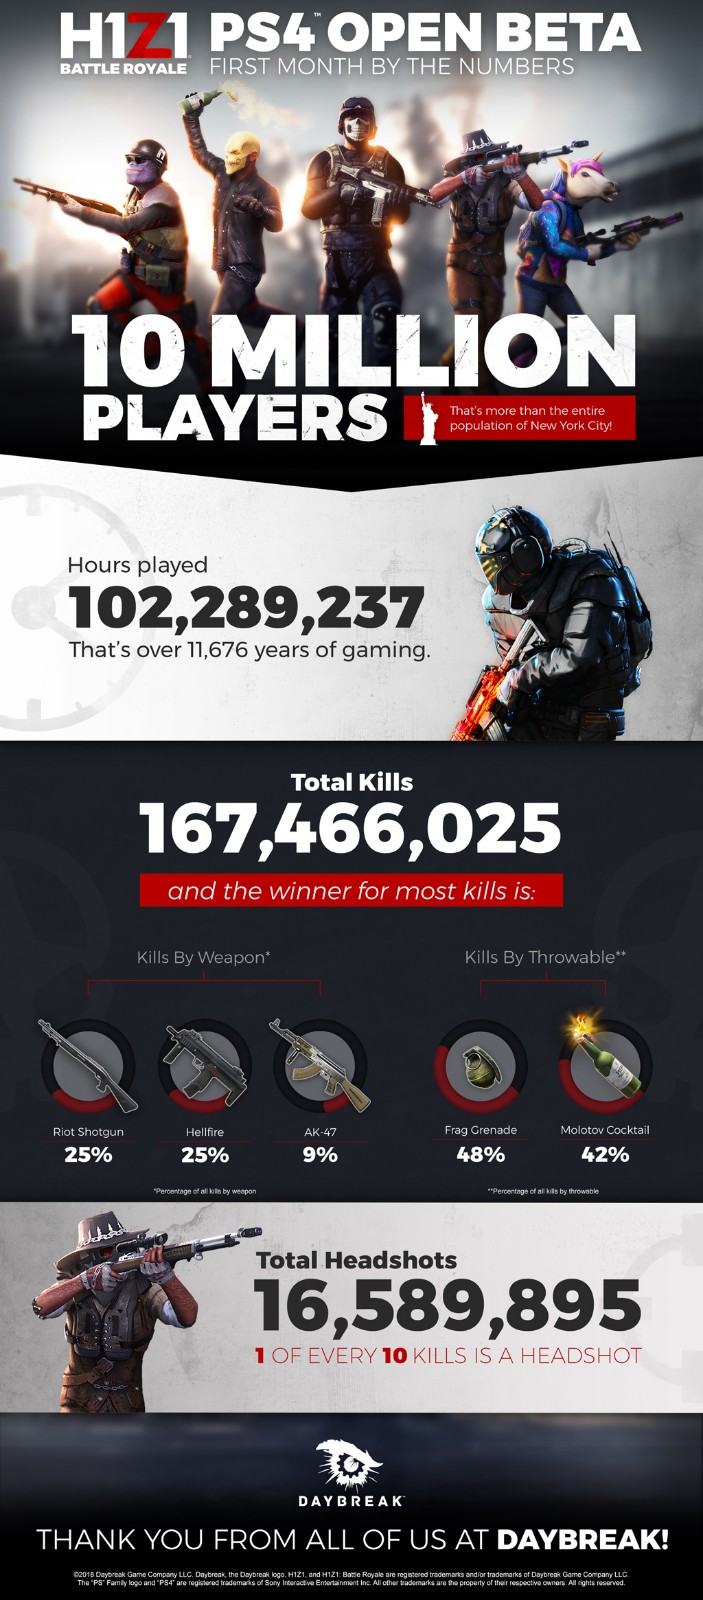 H1Z1_10-Million_Infographic_FinalNumbers_4b55dccb10_7e07440ee4.jpg